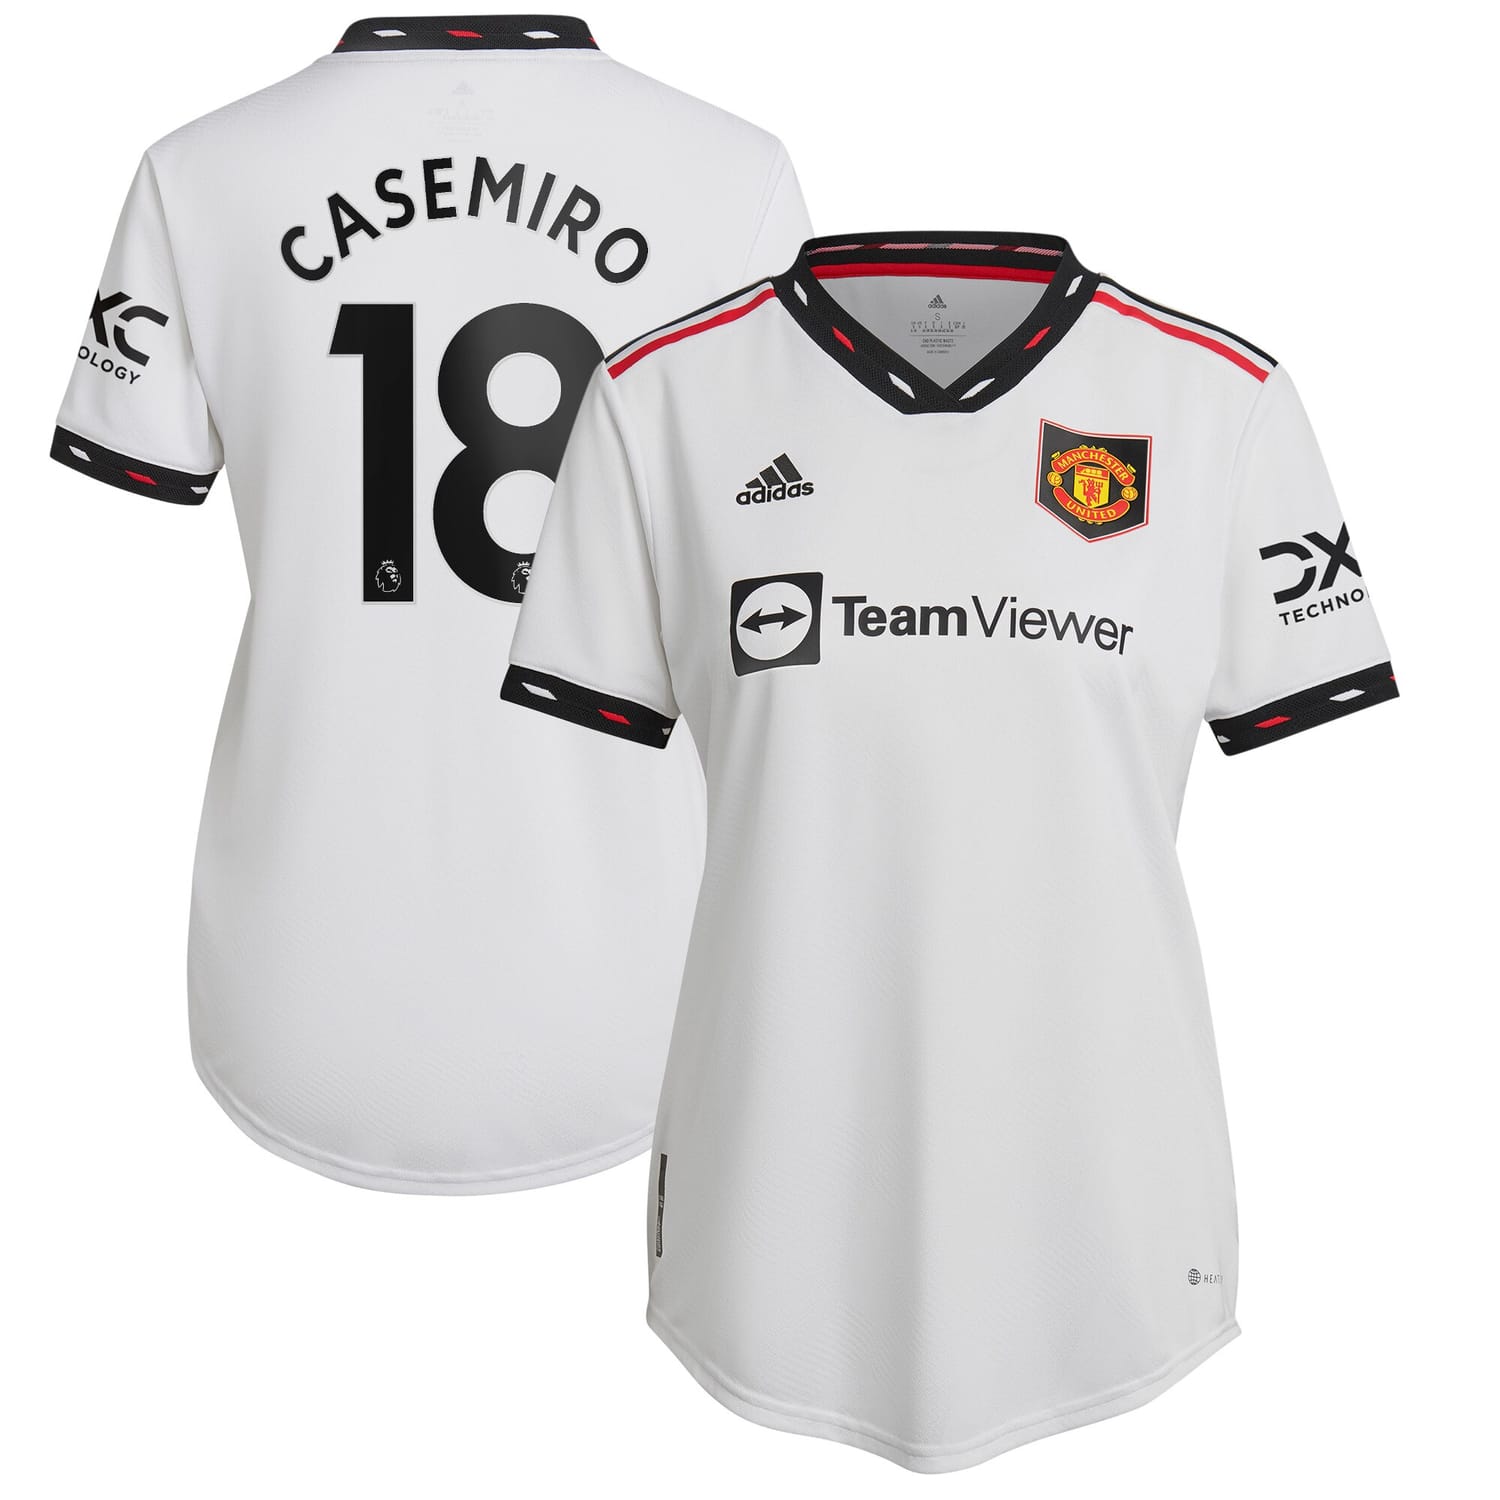 Premier League Manchester United Away Authentic Jersey Shirt 2022-23 player Casemiro 18 printing for Women